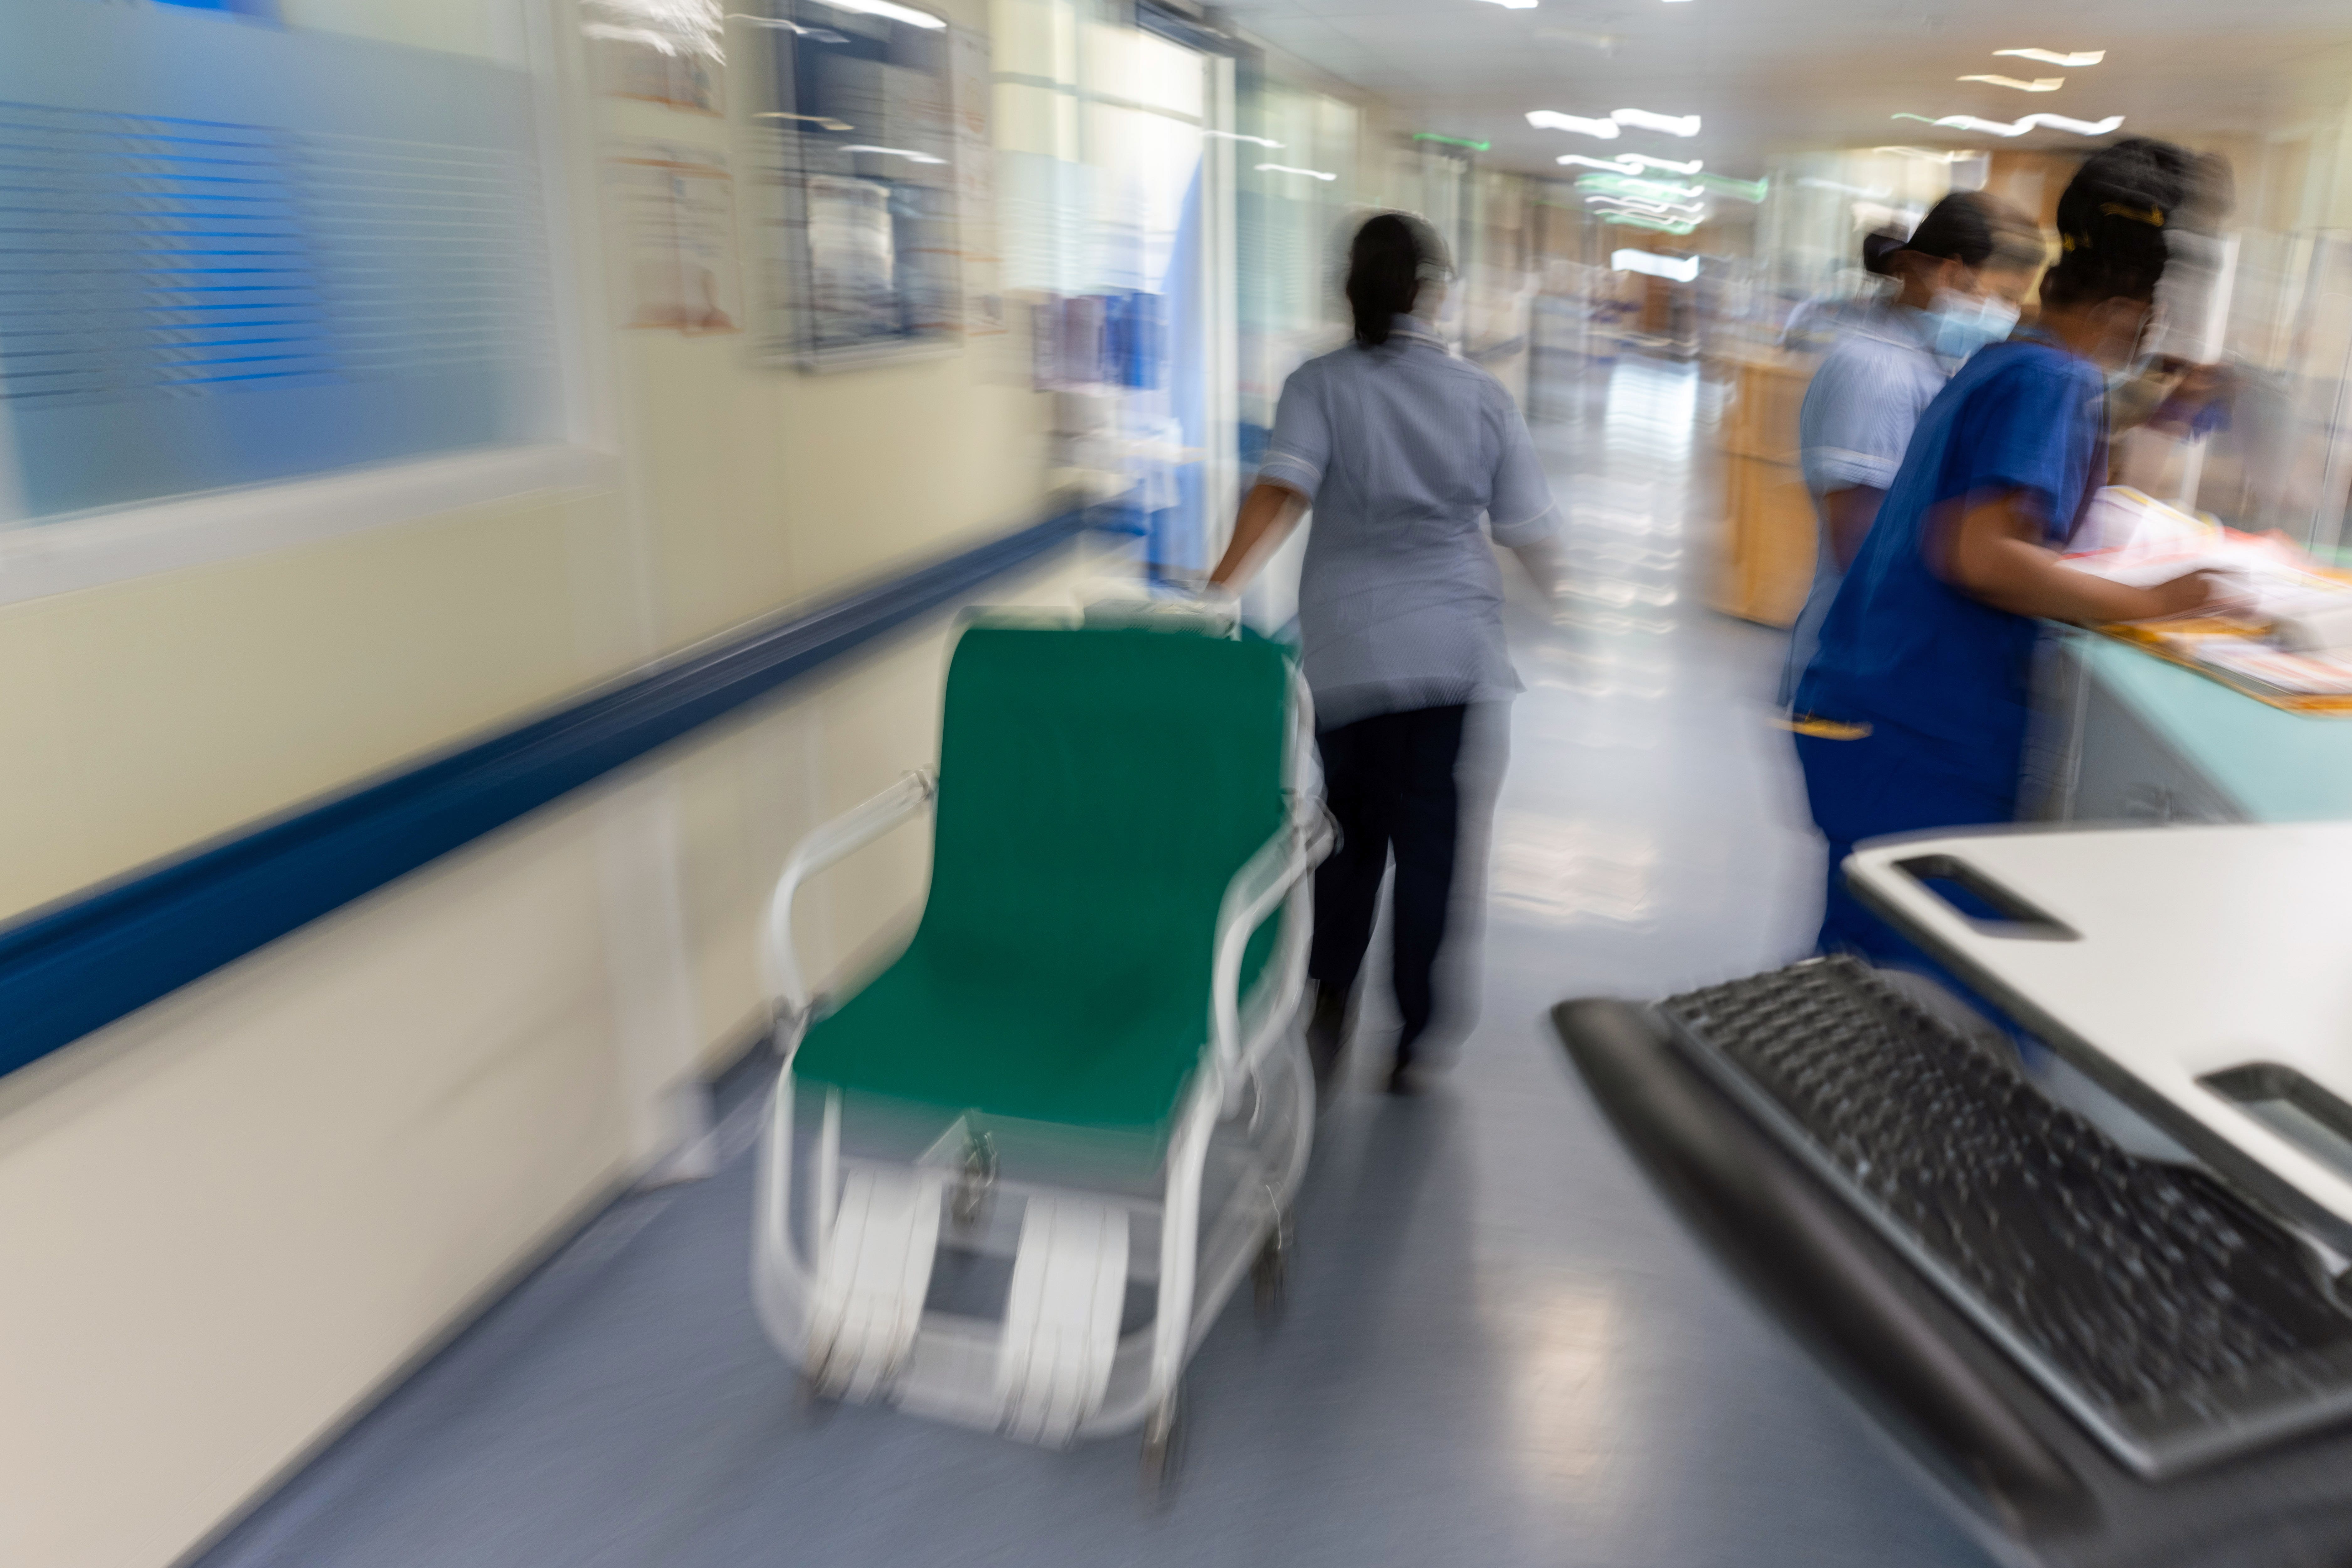 Delays in discharging patients have jumped sharply since the start of January